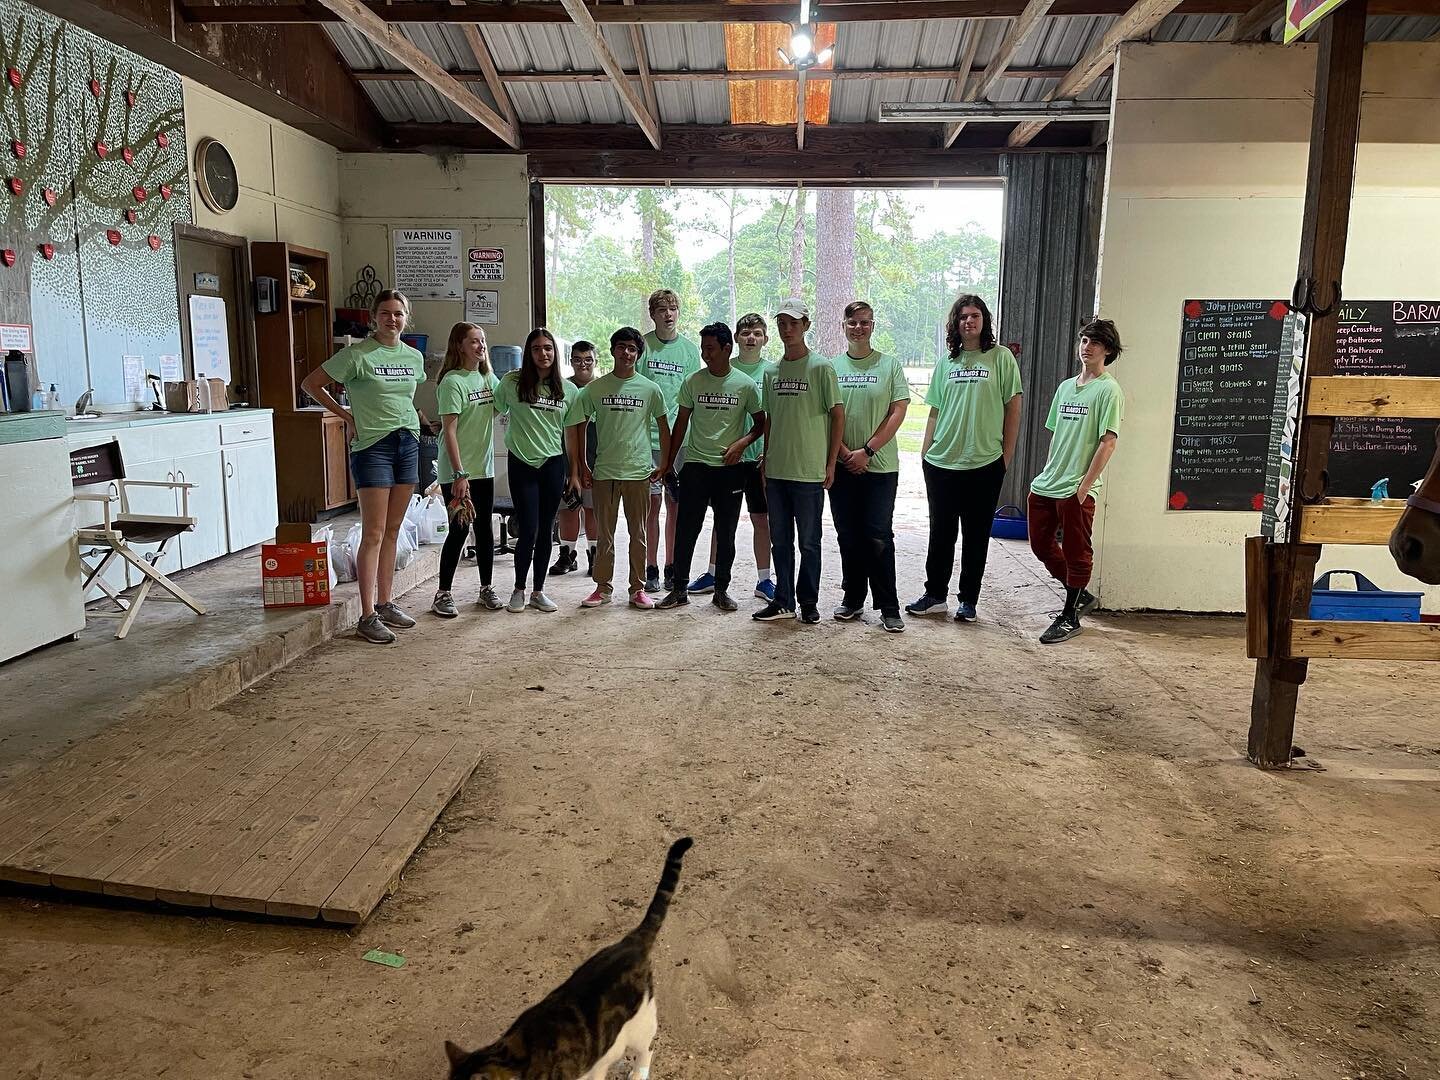 IT&rsquo;S A CAMP CROSSOVER!!! Twice the camps, twice the fun! Our friends at the Maclay School have spent two days last week, and will be spending two days this week helping at our camps, during their community service camp! They have spent the last